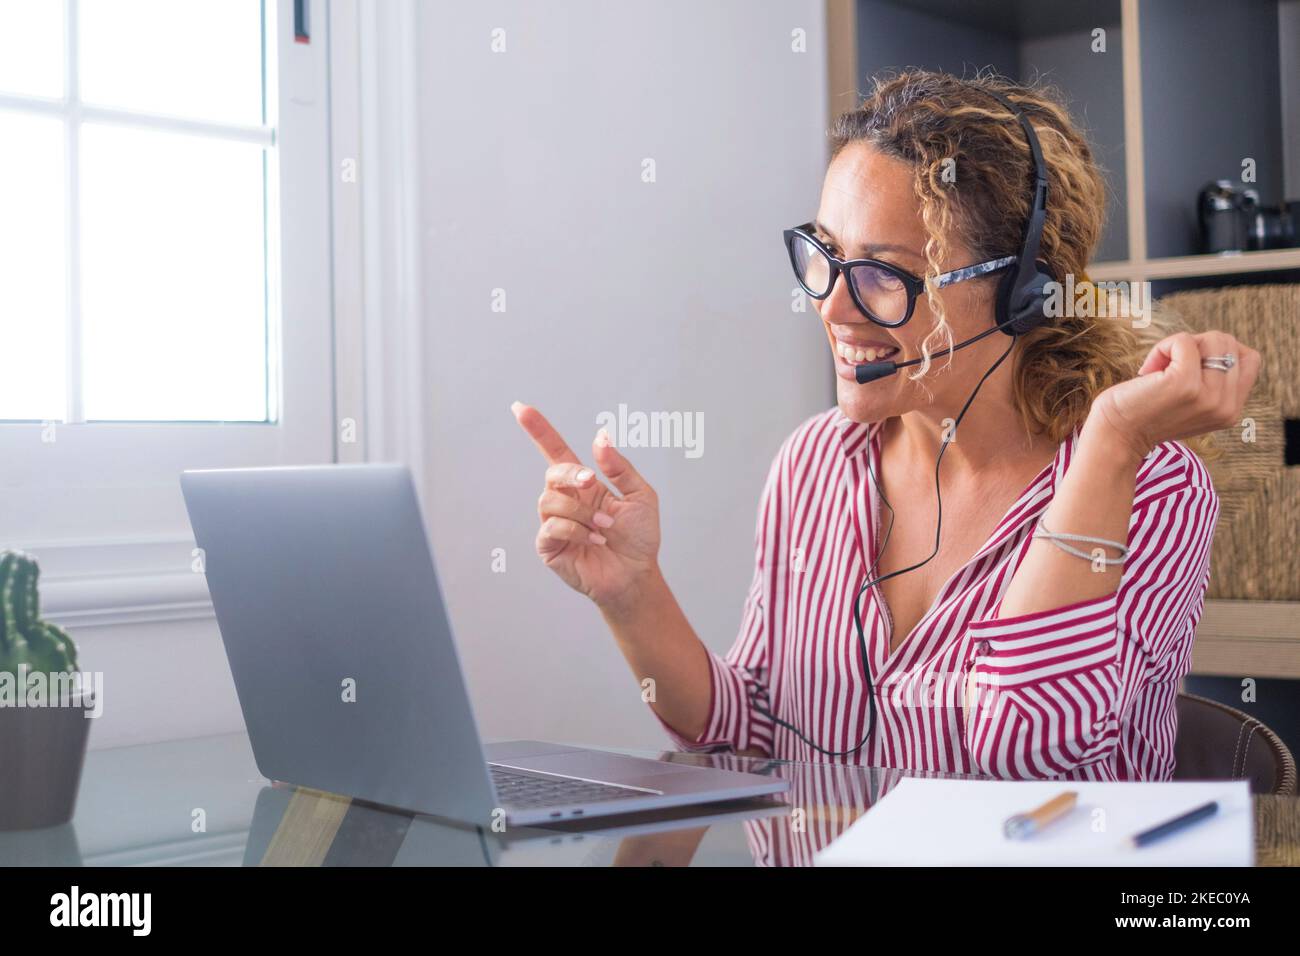 Attractive caucasian woman sit at homeoffice room wearing headset take part in educational webinar using laptop. Video call event with clients or personal chat with friend remotely concept Stock Photo